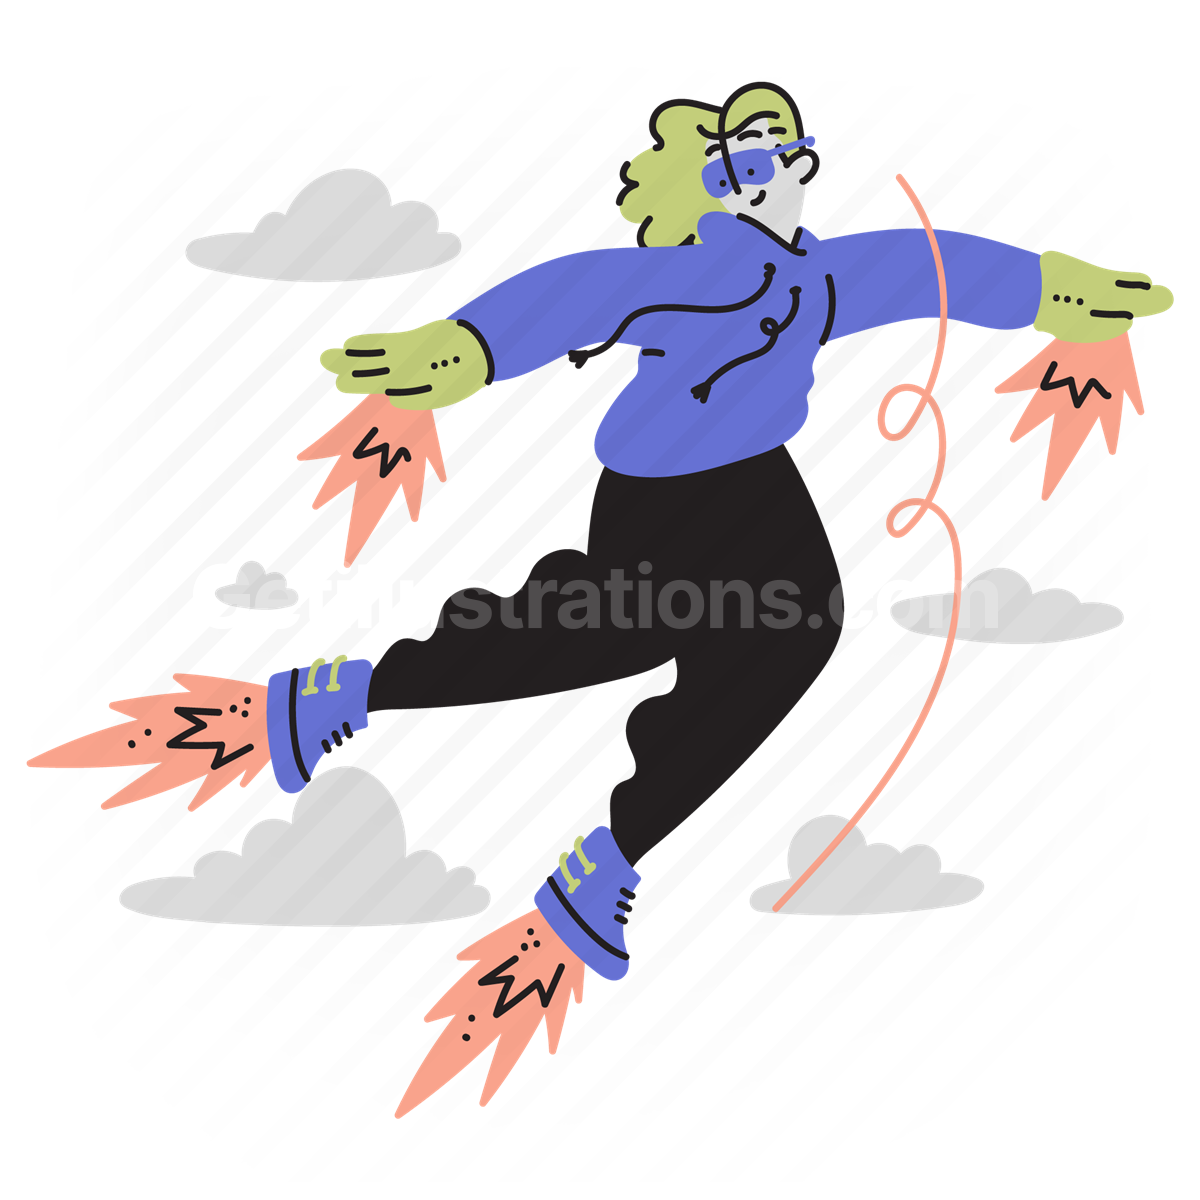 jetpack, jets, travelling, transportation, tech, woman, hands, feet, invention